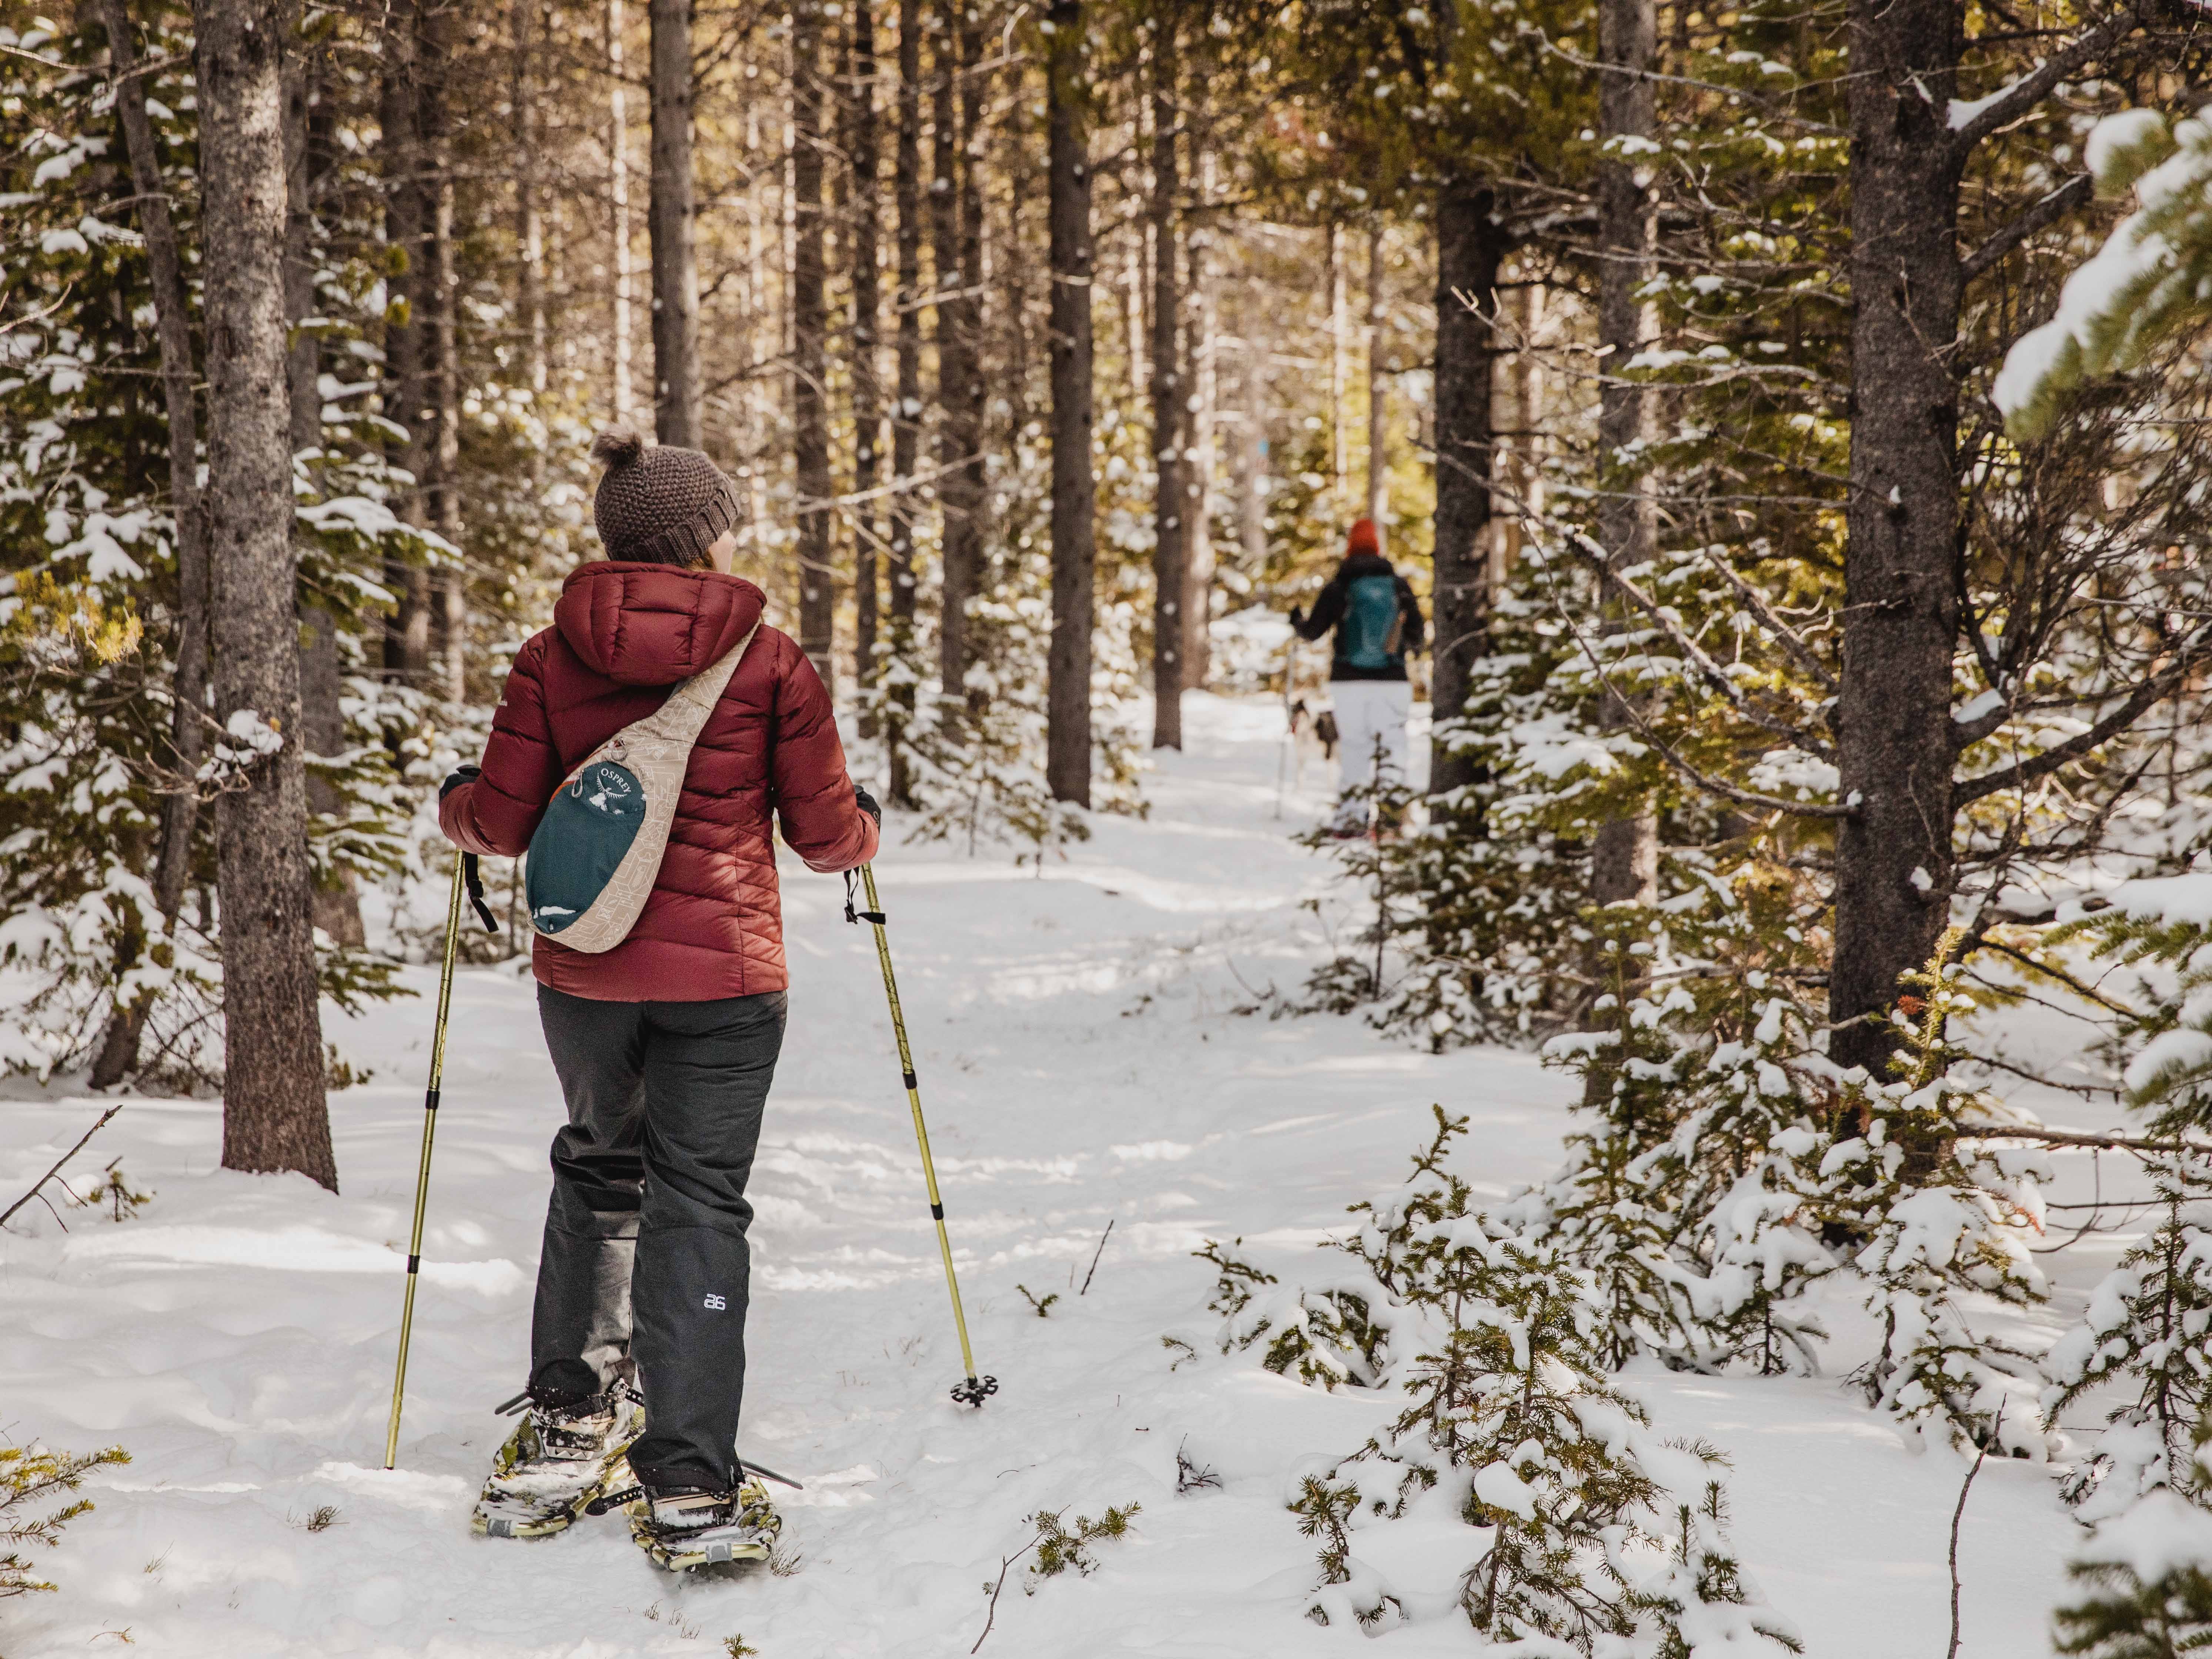 Two women on a trail snowshoe away from you on a bright winter day in the forest